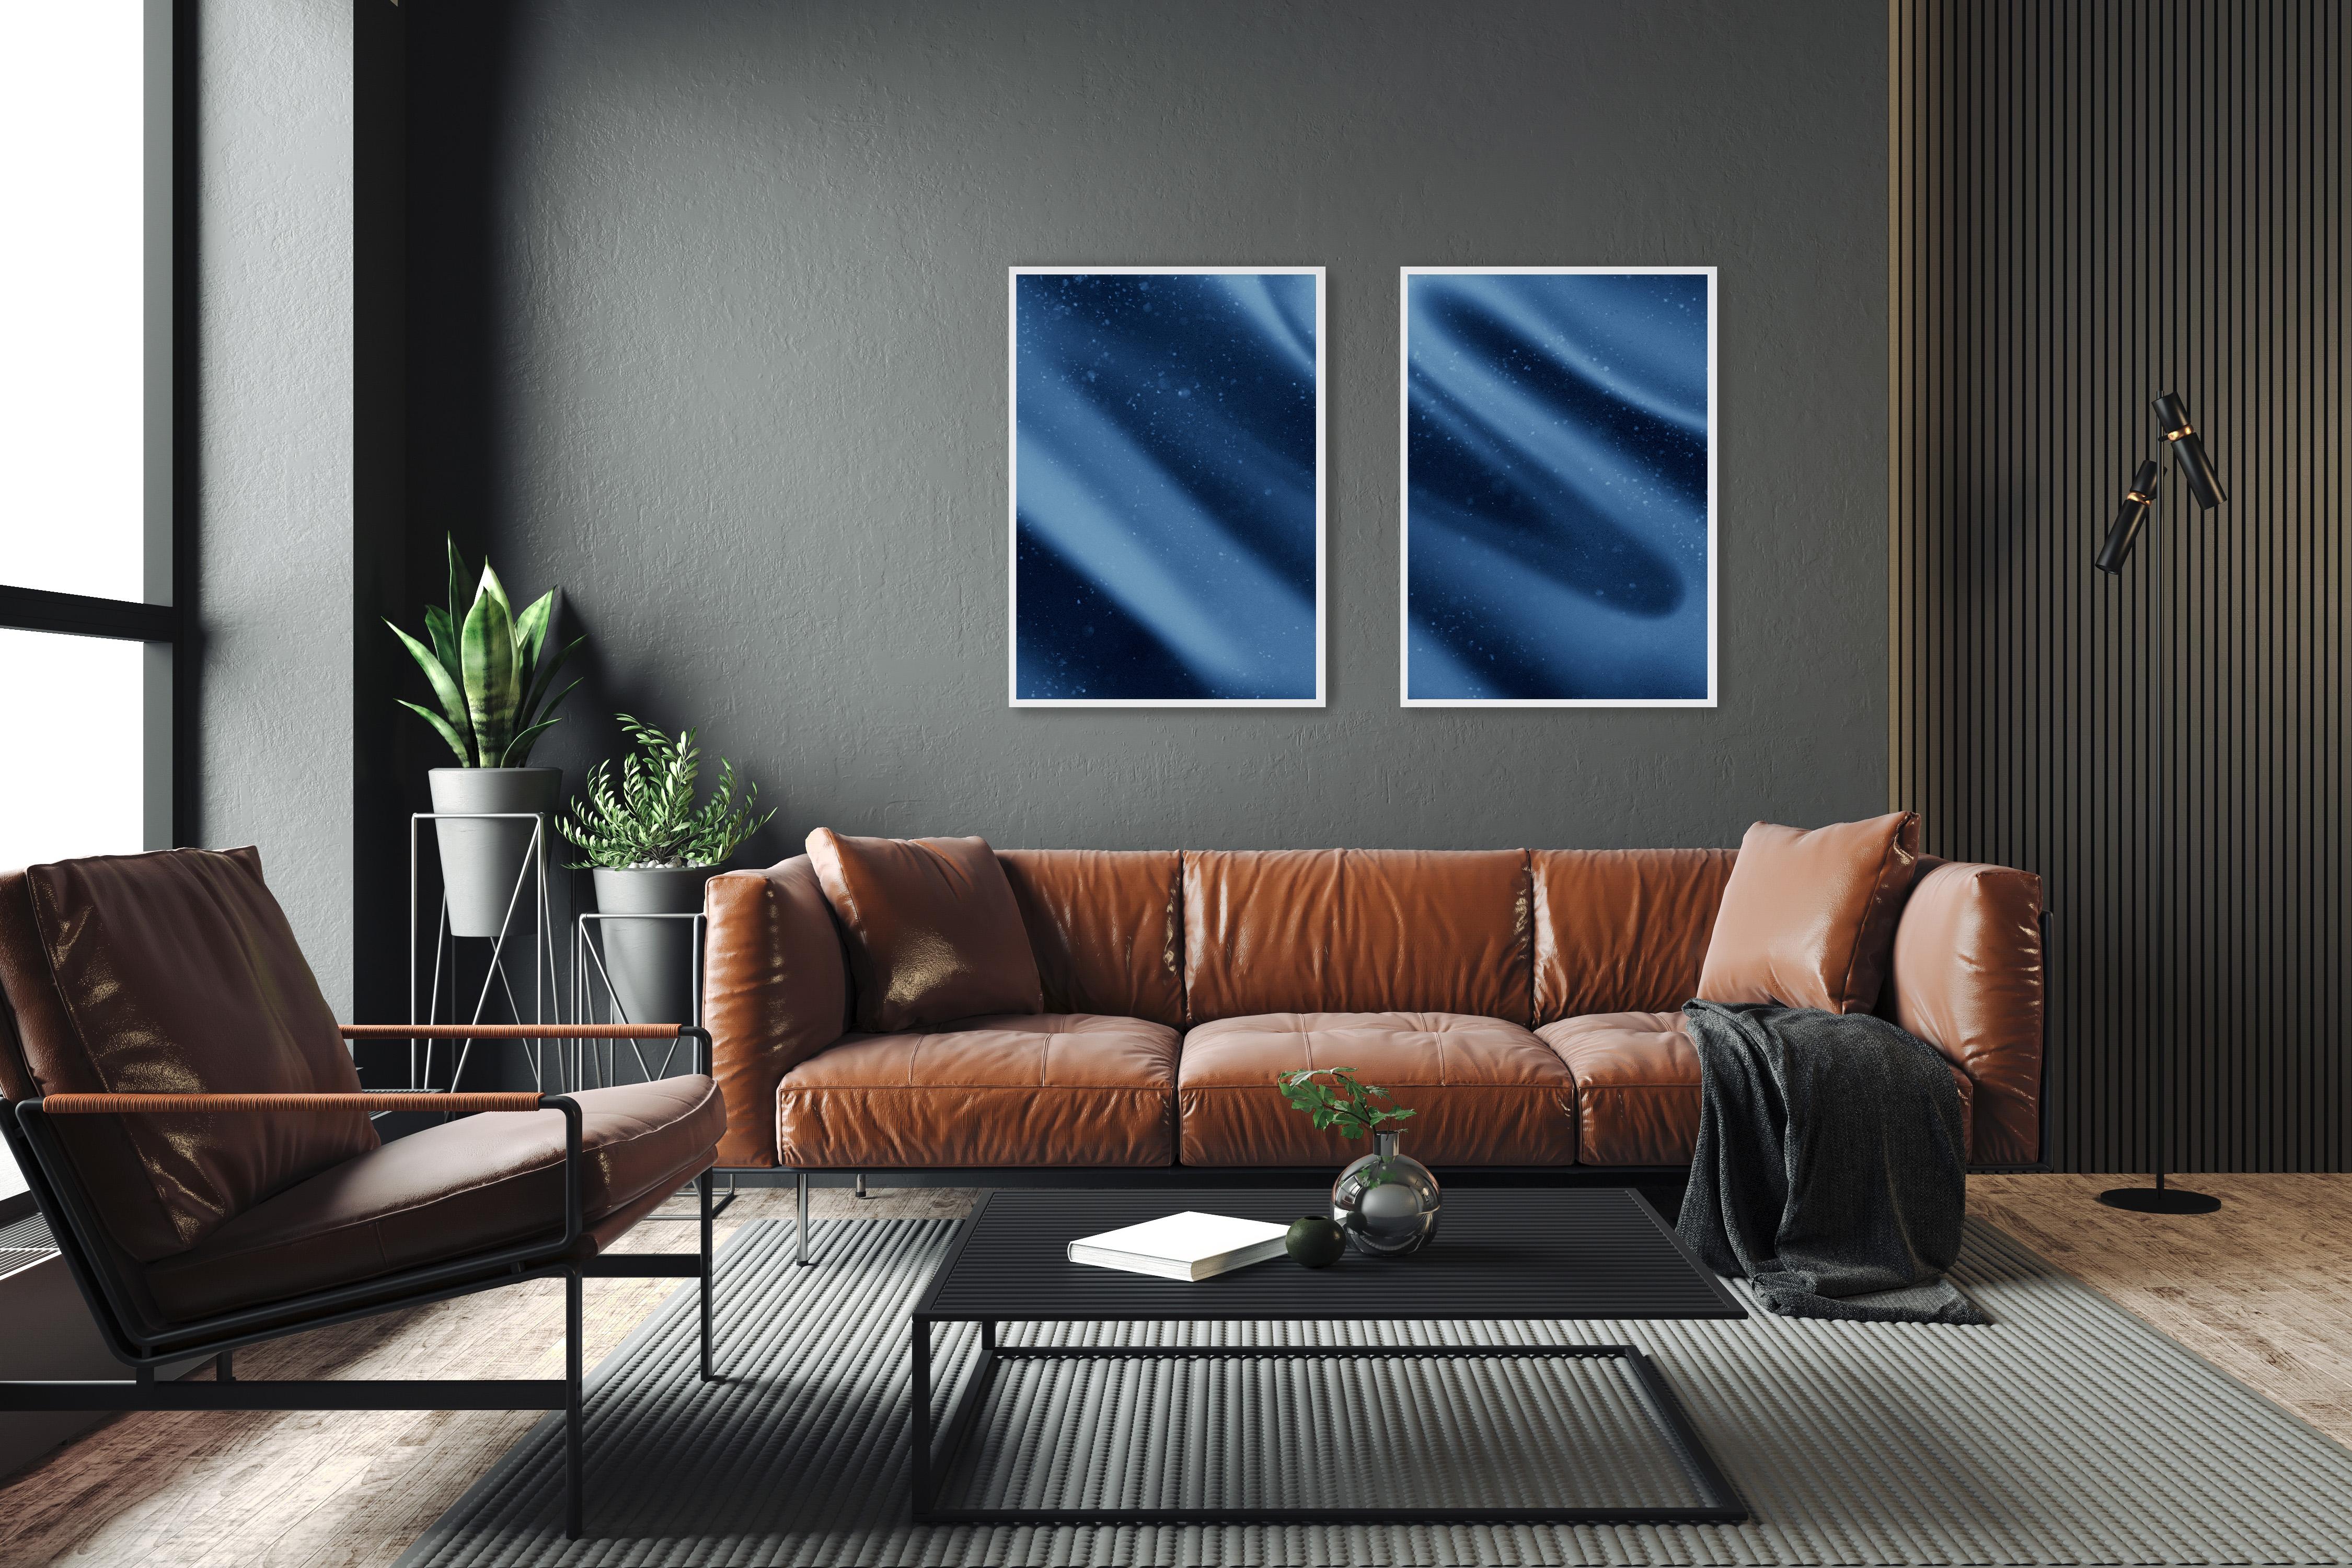 Space is The Place, Depp Blue Tones Diptych, Abstract Silk Shapes Limited Giclee - Contemporary Photograph by Ryan Rivadeneyra